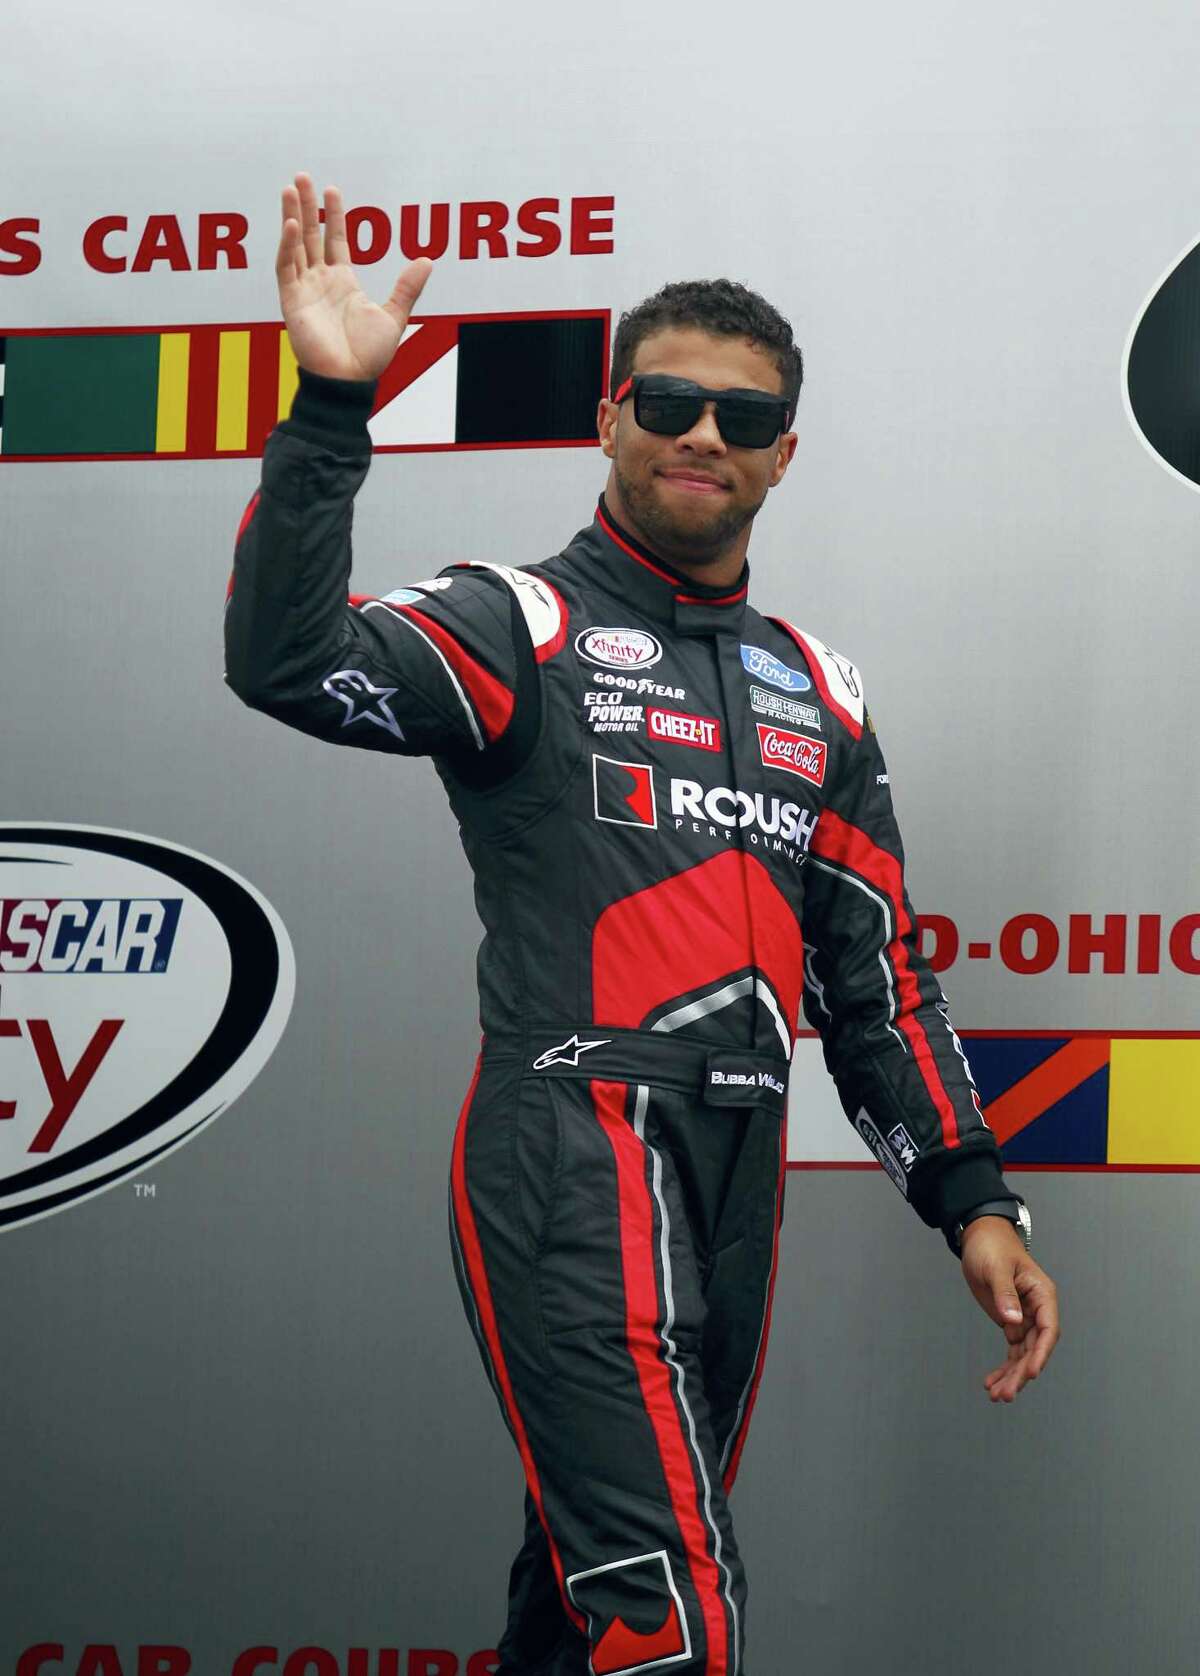 Darrell Wallace Jr. will become the first black driver at NASCAR’s top level since 2006 when he replaces Aric Almirola this weekend at Pocono Raceway.